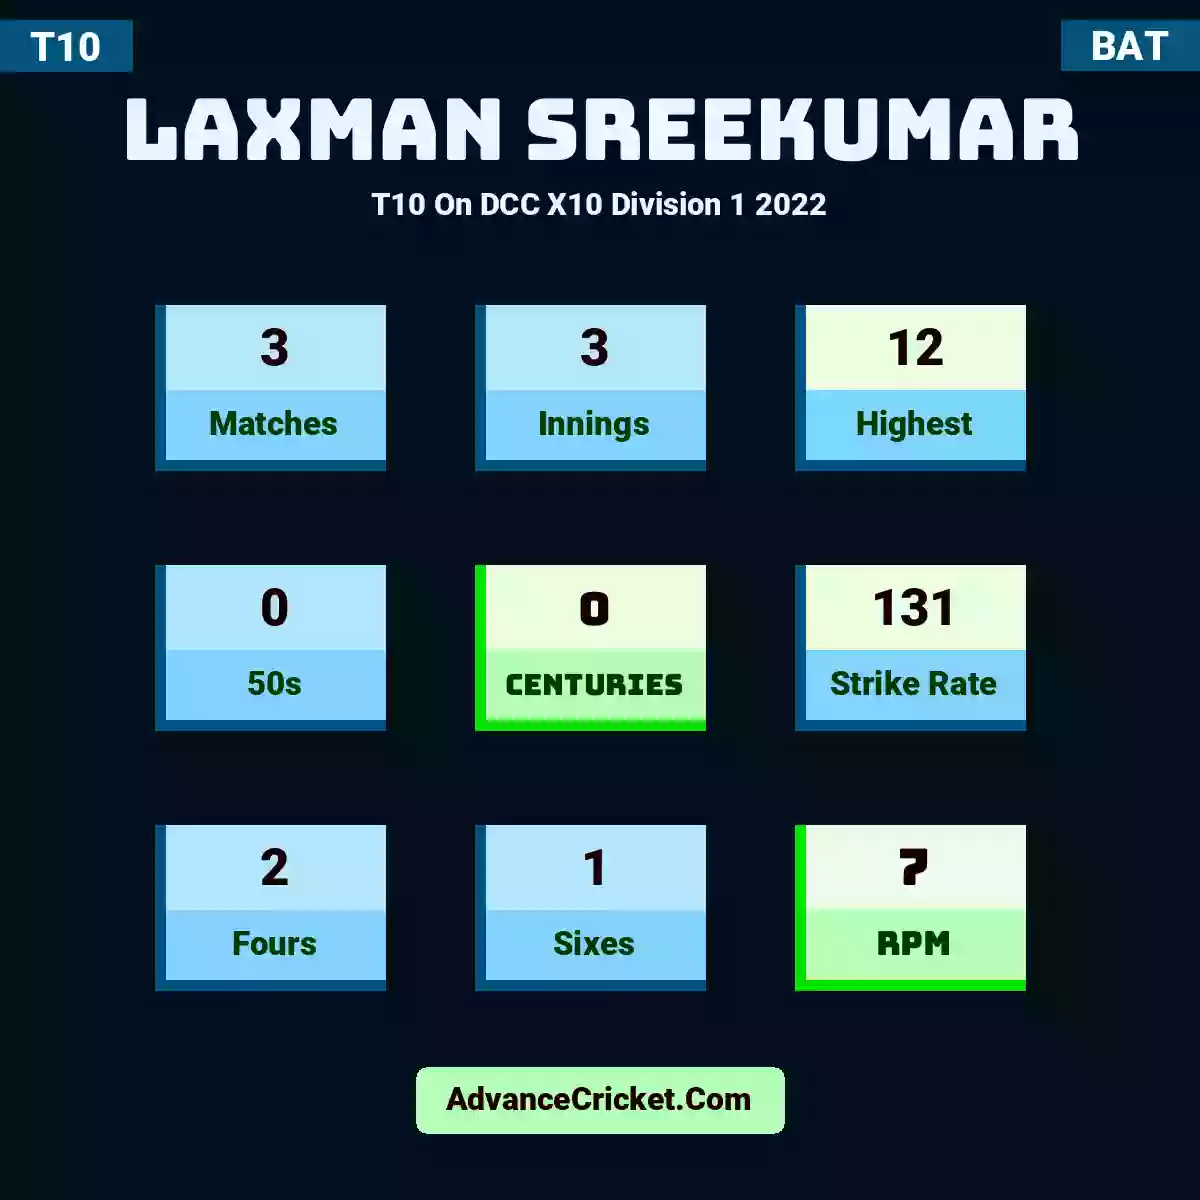 Laxman Sreekumar T10  On DCC X10 Division 1 2022, Laxman Sreekumar played 3 matches, scored 12 runs as highest, 0 half-centuries, and 0 centuries, with a strike rate of 131. L.Sreekumar hit 2 fours and 1 sixes, with an RPM of 7.